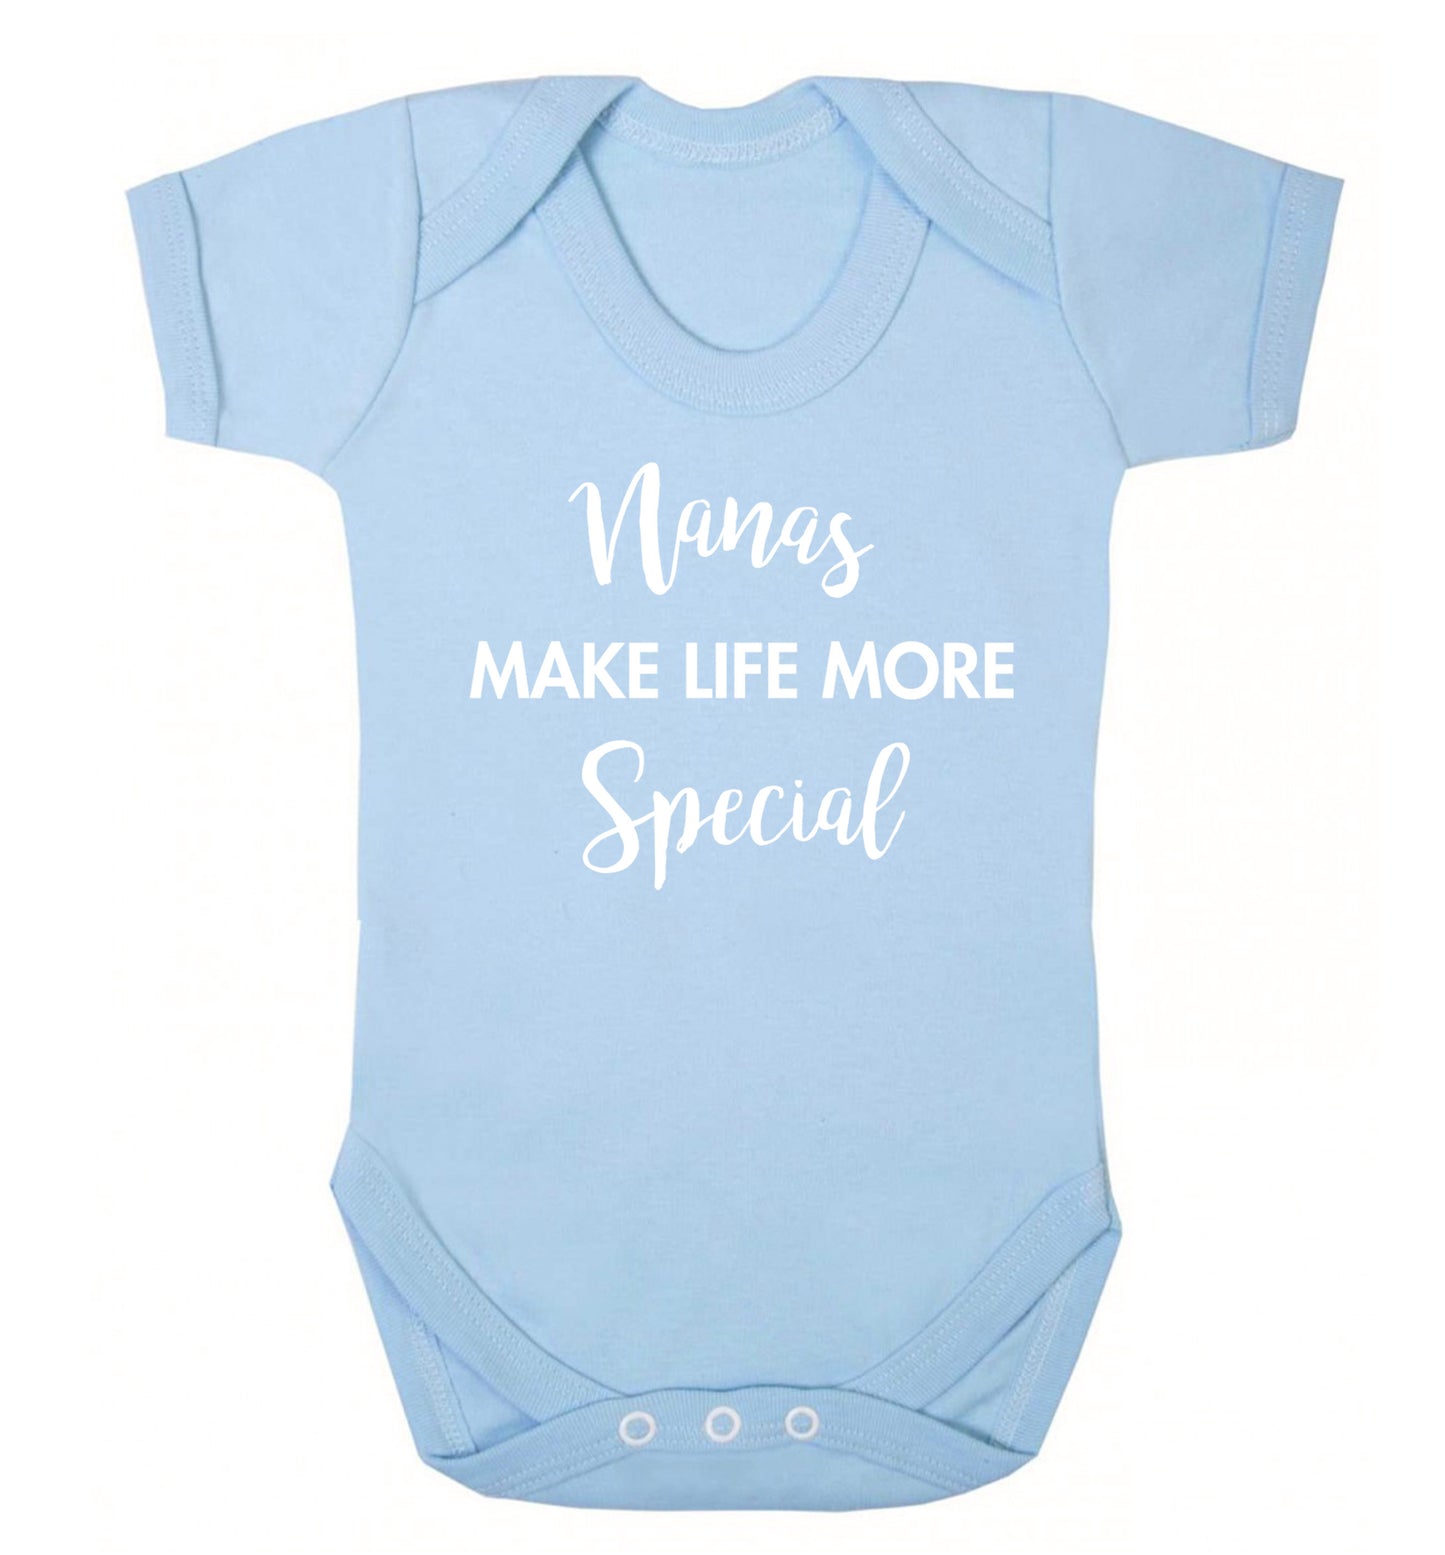 Nanas make life more special Baby Vest pale blue 18-24 months